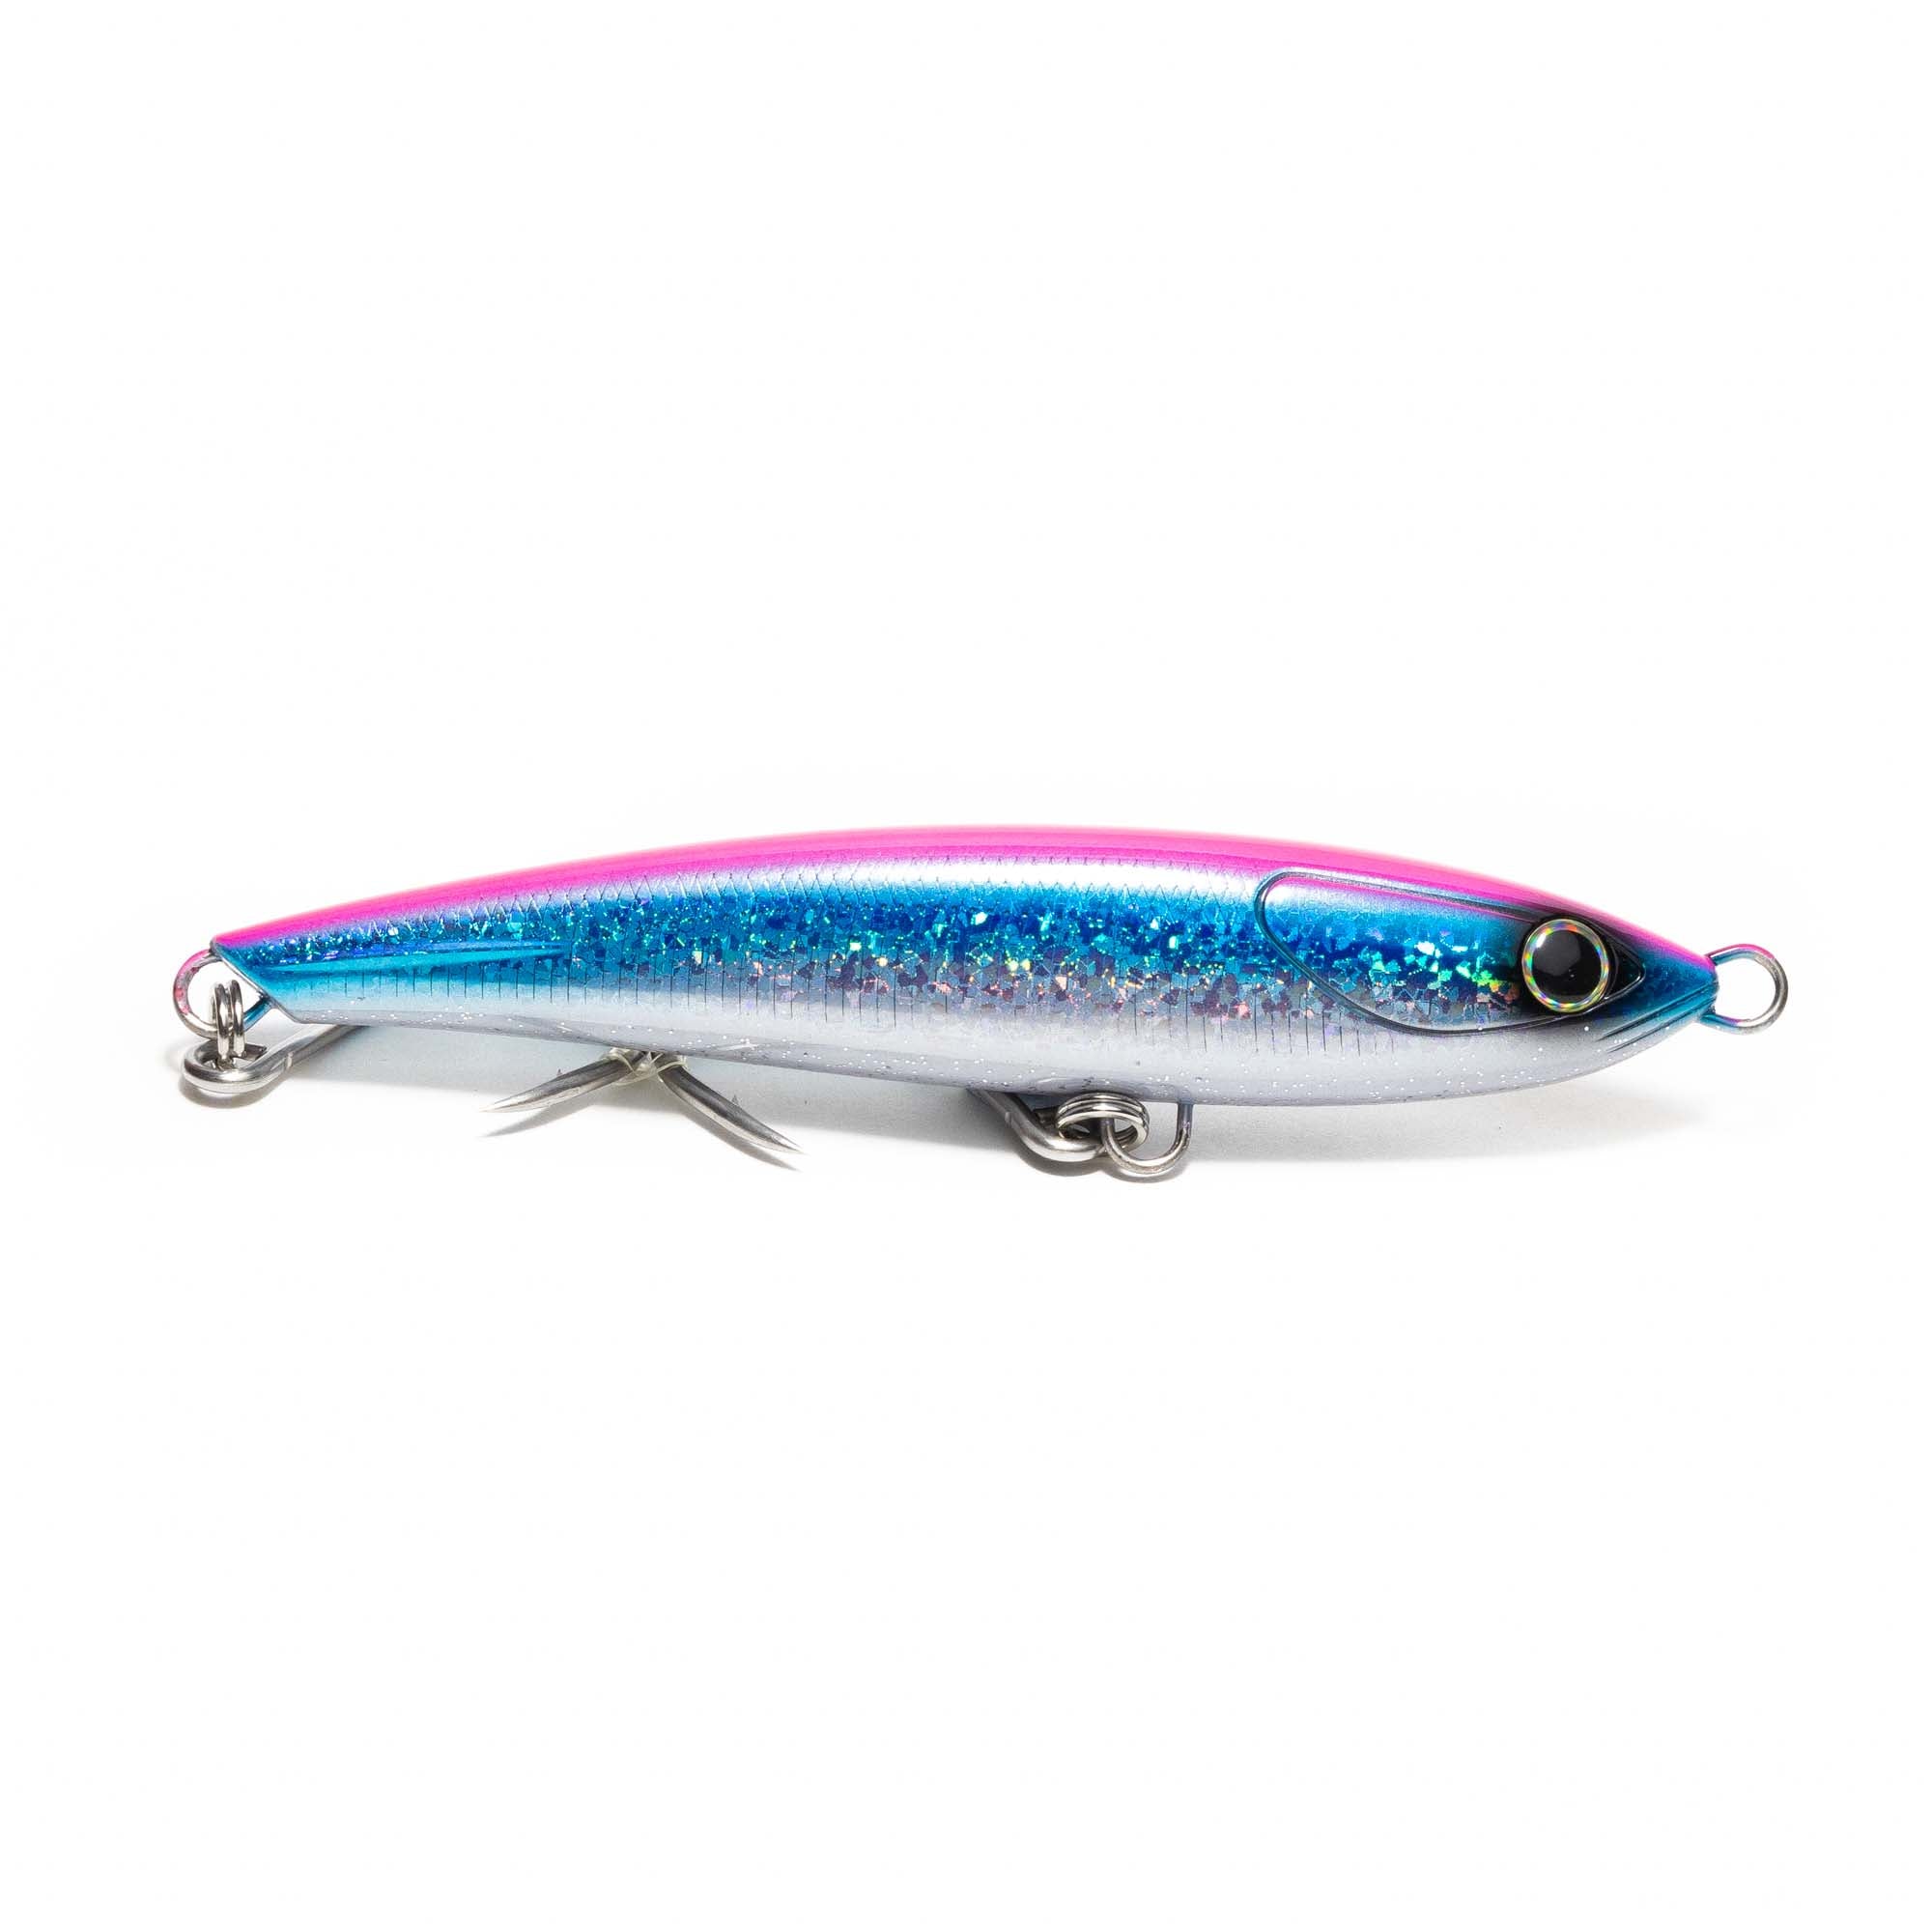 Oceans Legacy Brand - Compleat Angler Nedlands Pro Tackle